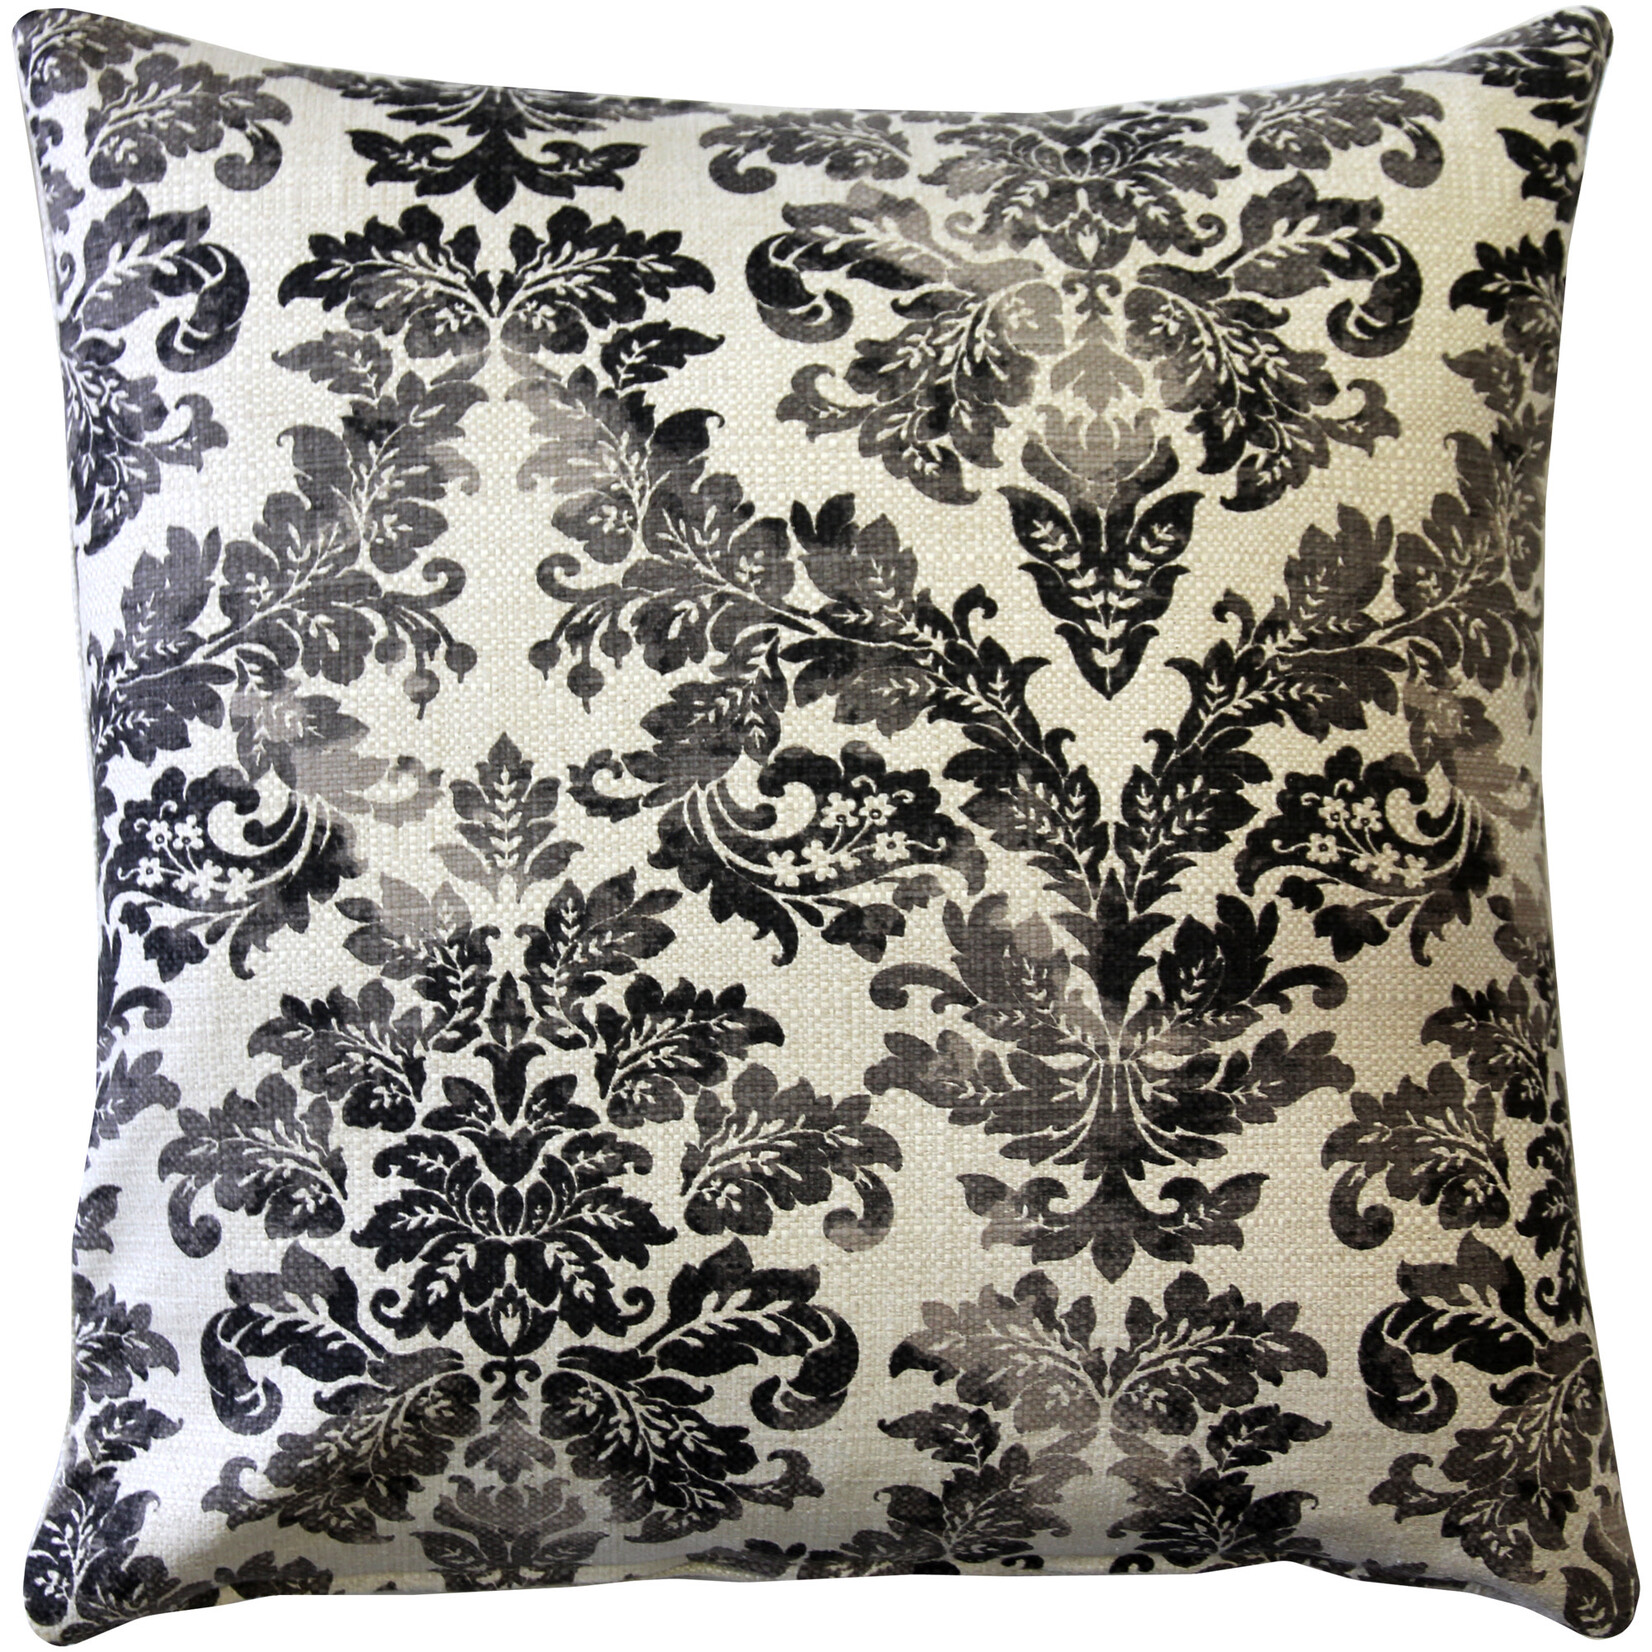 Calliope Gray Damask Throw Pillow Cover 20" X 20"